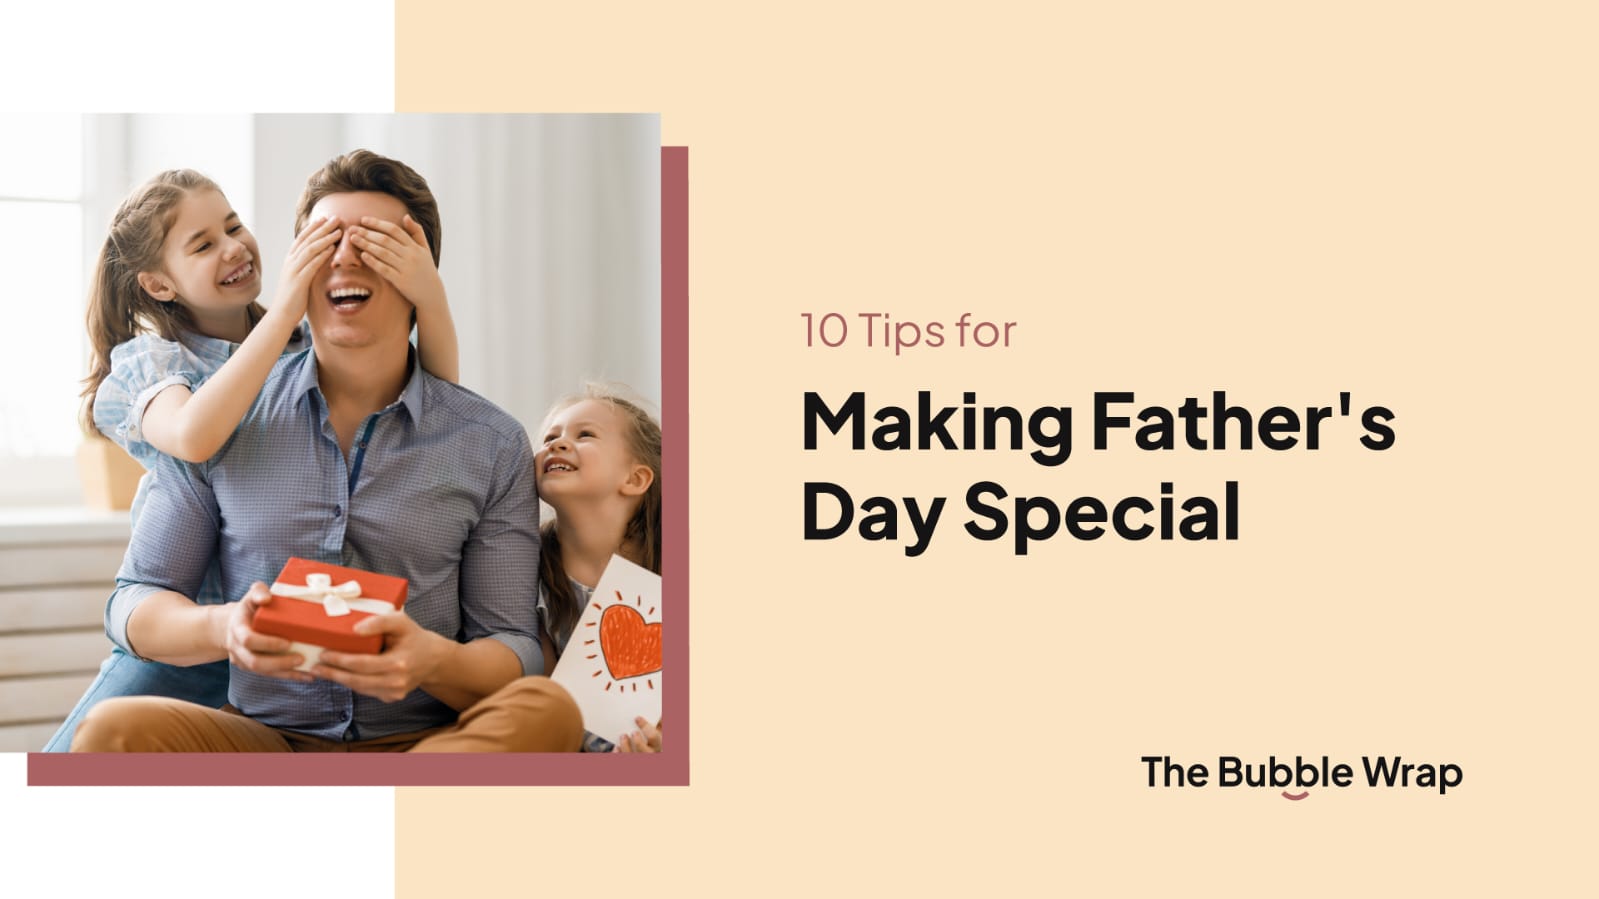 10 Tips For Making Father's Day Special